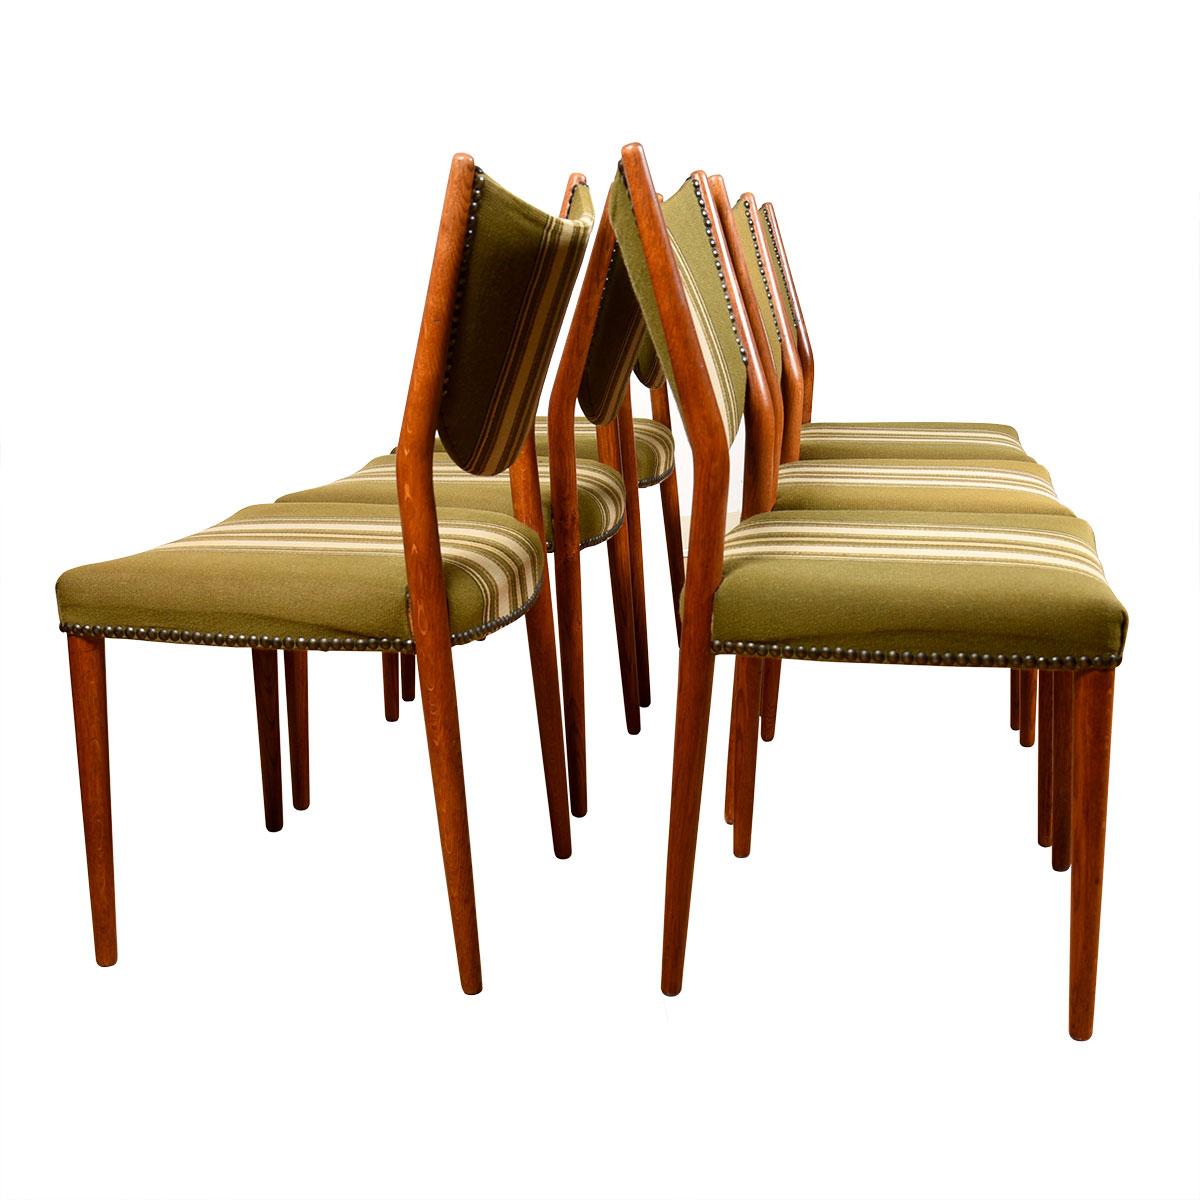 Set of 6 Danish Modern Dining Chairs with Striped Upholstery In Excellent Condition For Sale In Kensington, MD